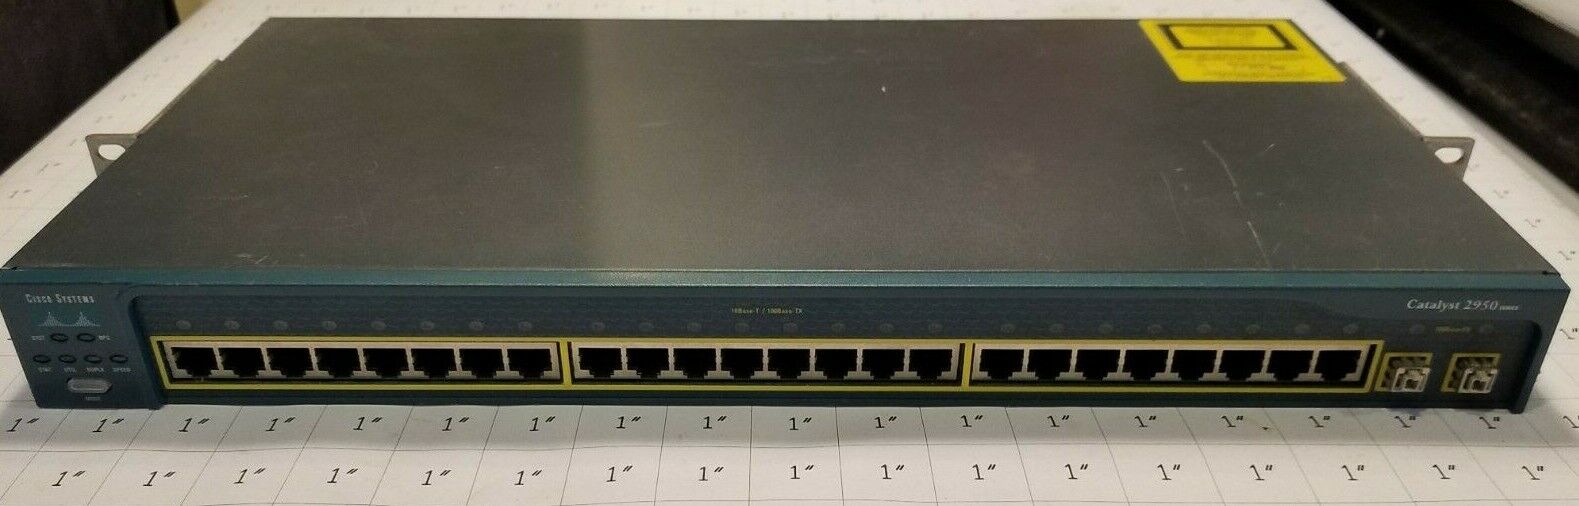 Cisco Systems WS-C2950C-24 Layer 2 Switch 24-Port 10/100 Catalyst 2950 Series